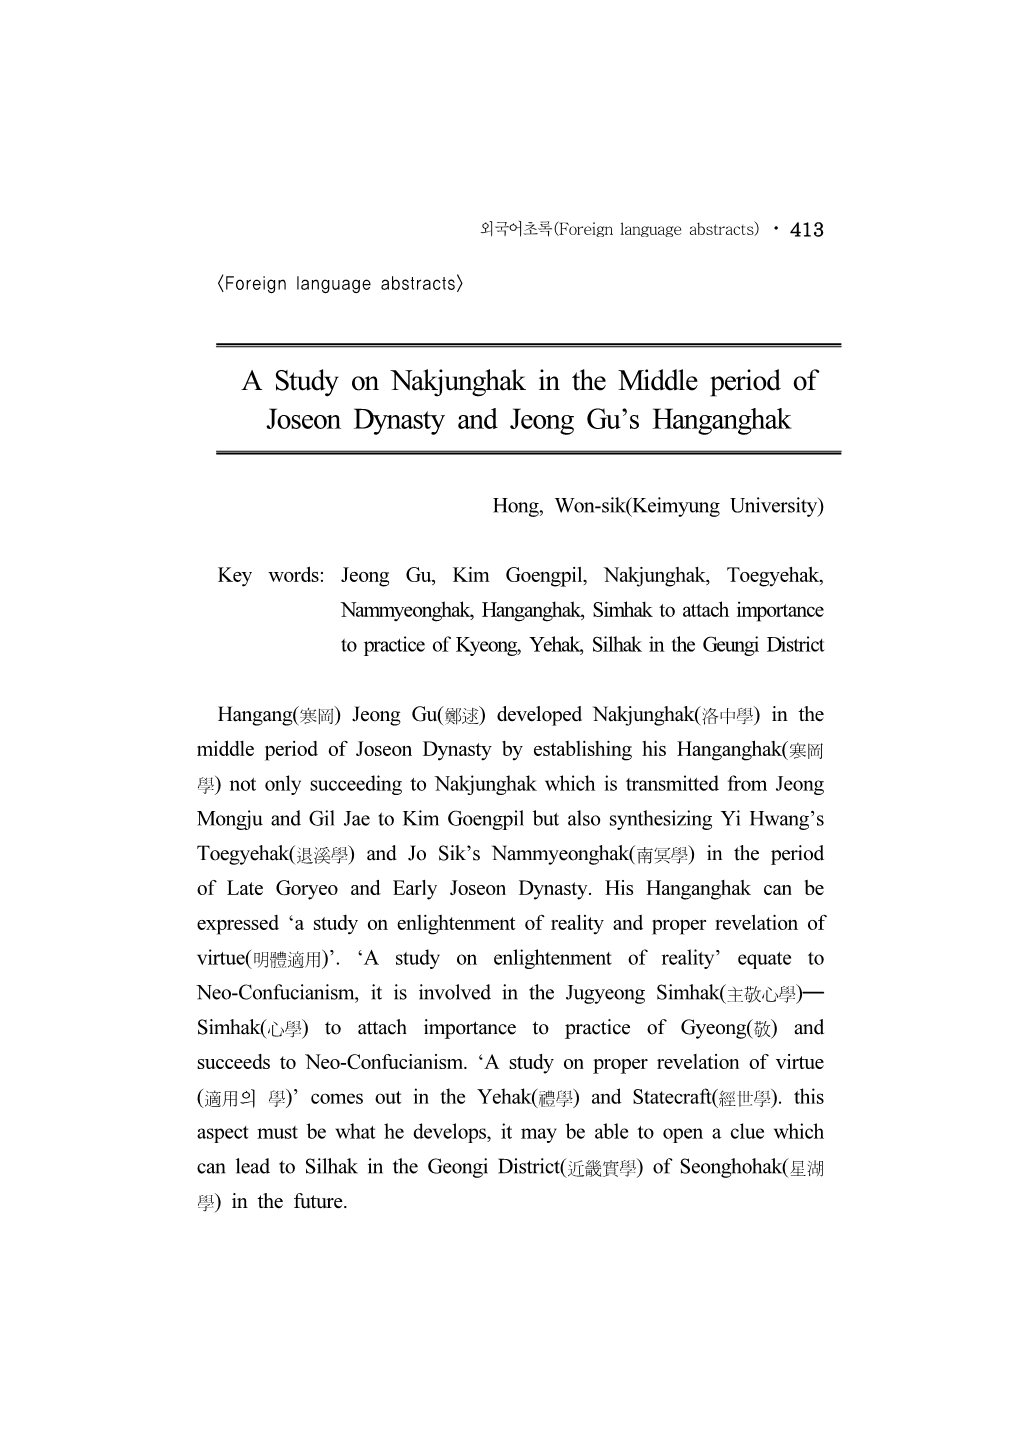 A Study on Nakjunghak in the Middle Period of Joseon Dynasty and Jeong Gu’S Hanganghak